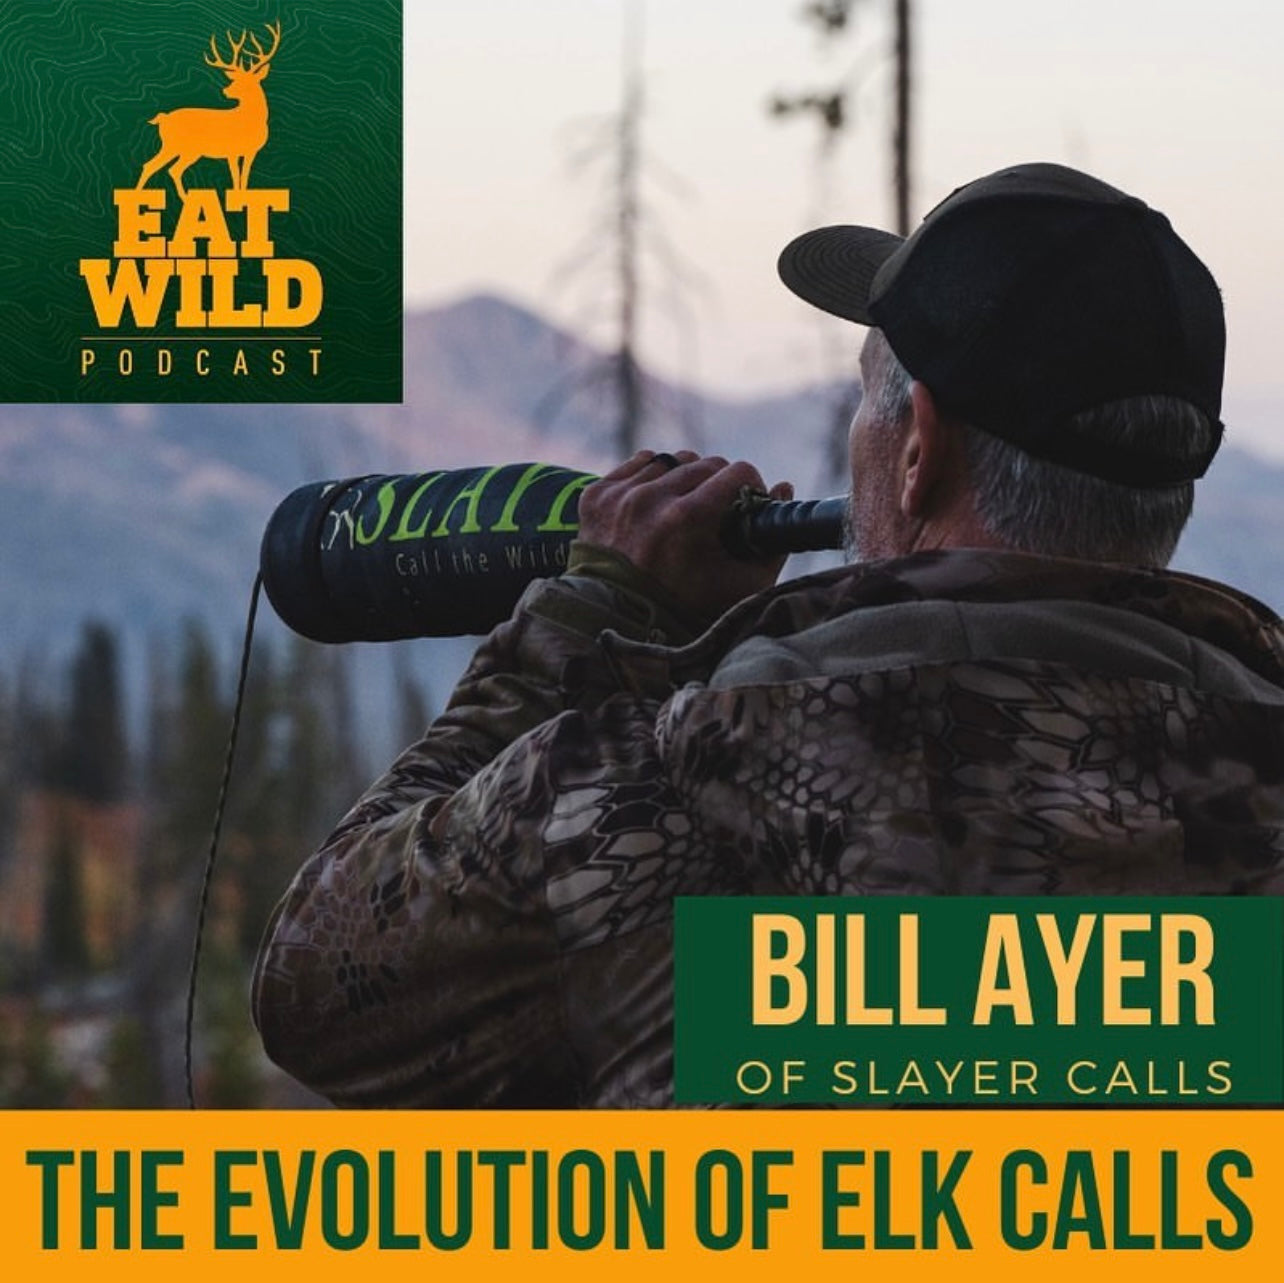 EatWild 80 - The Evolution of Elk Calls - with Bill Ayers of Slayer Calls